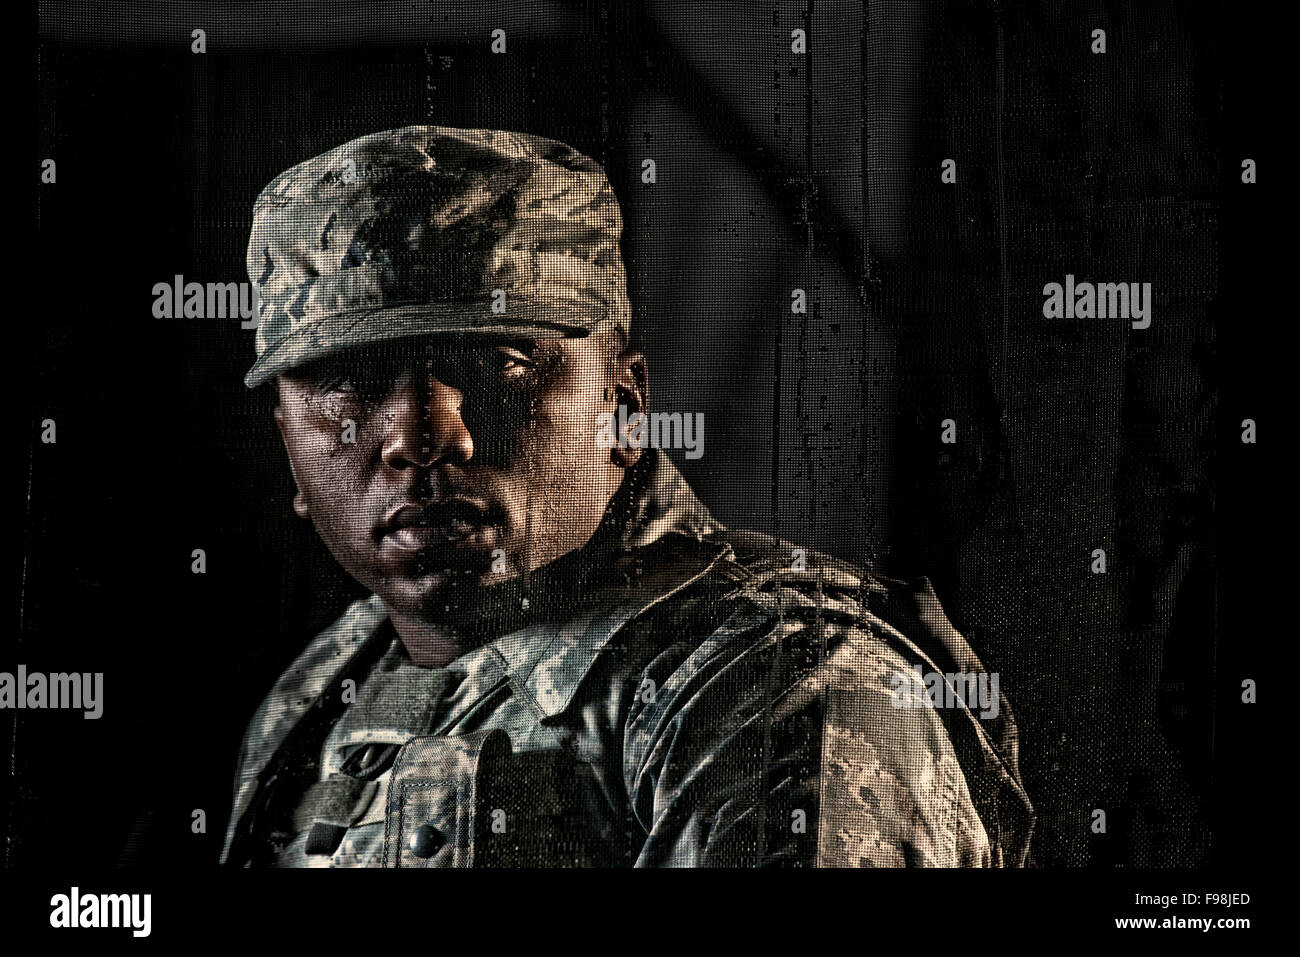 Air Force Security Forces member secures the stairwell of a building during clearing operations training. Stock Photo